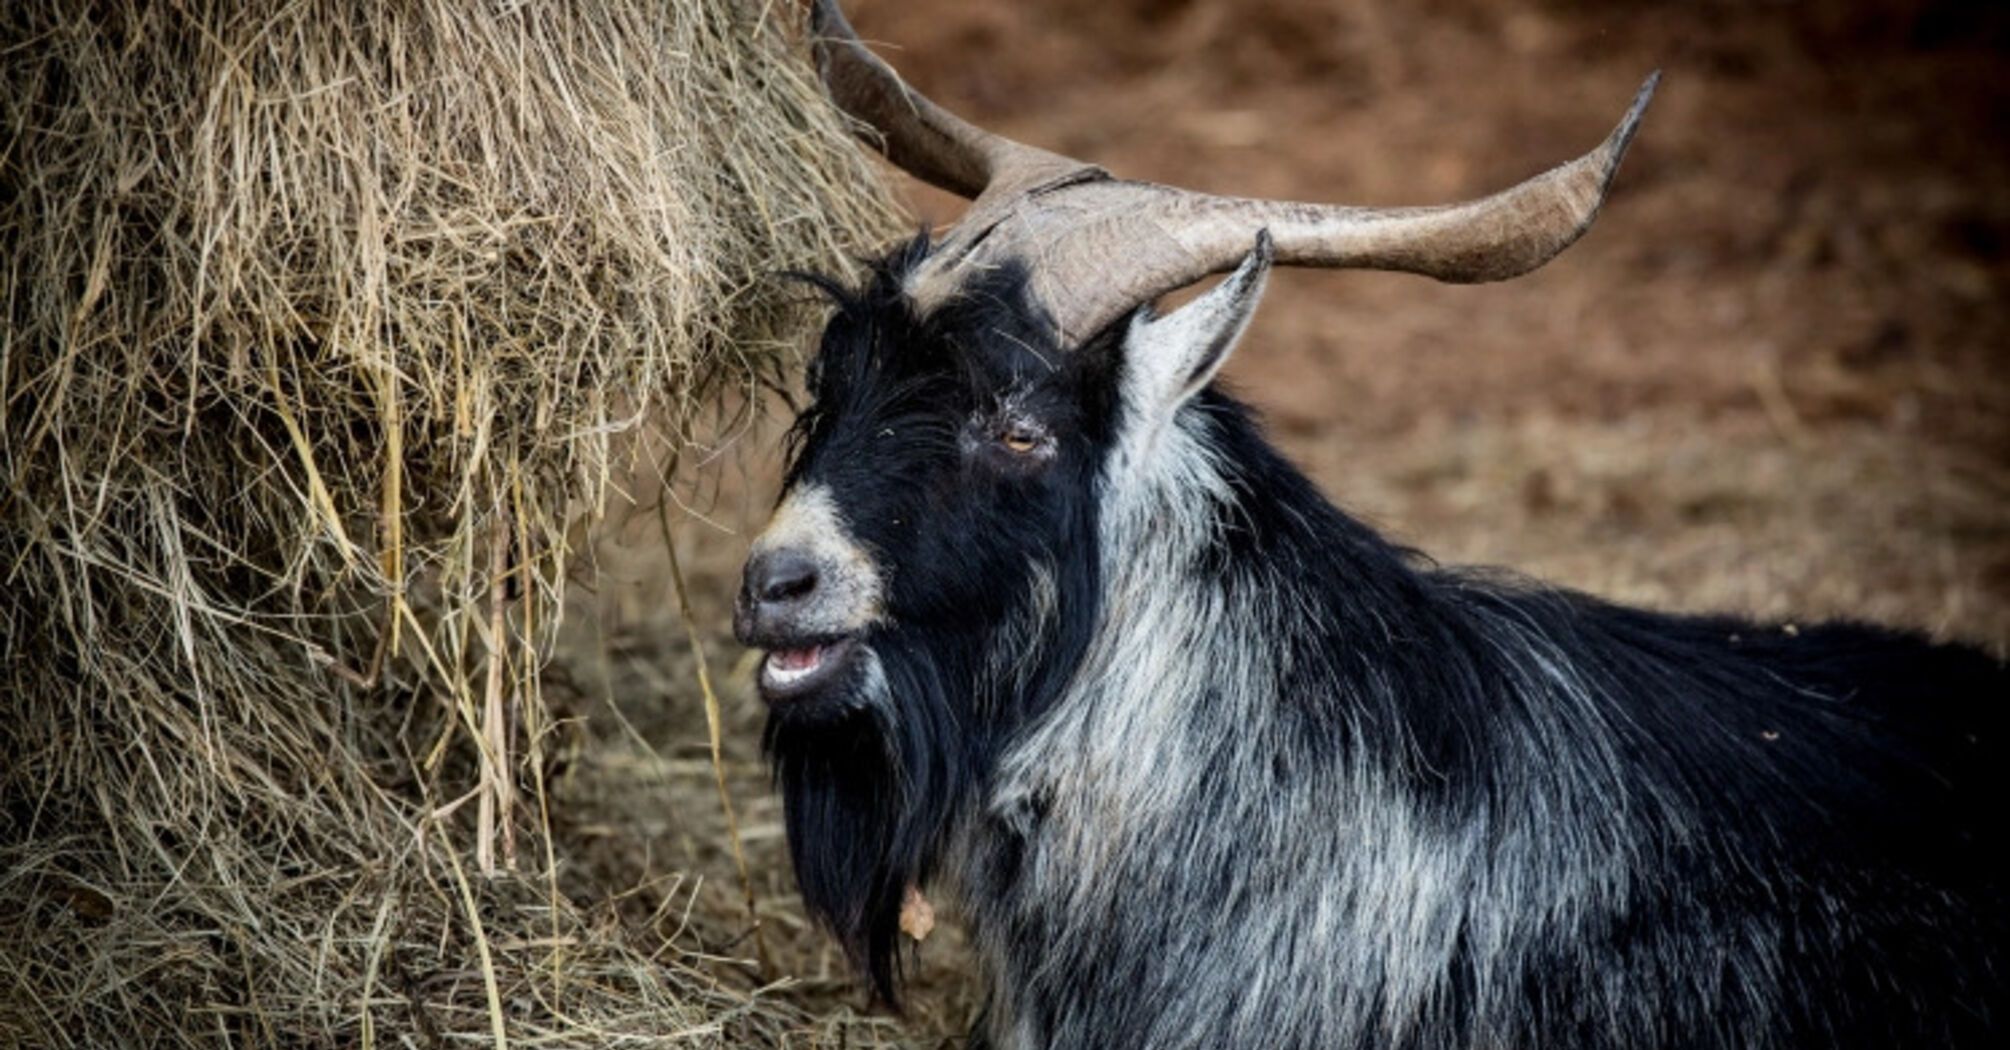 Italian island, they are looking for "foster families" for wild goats